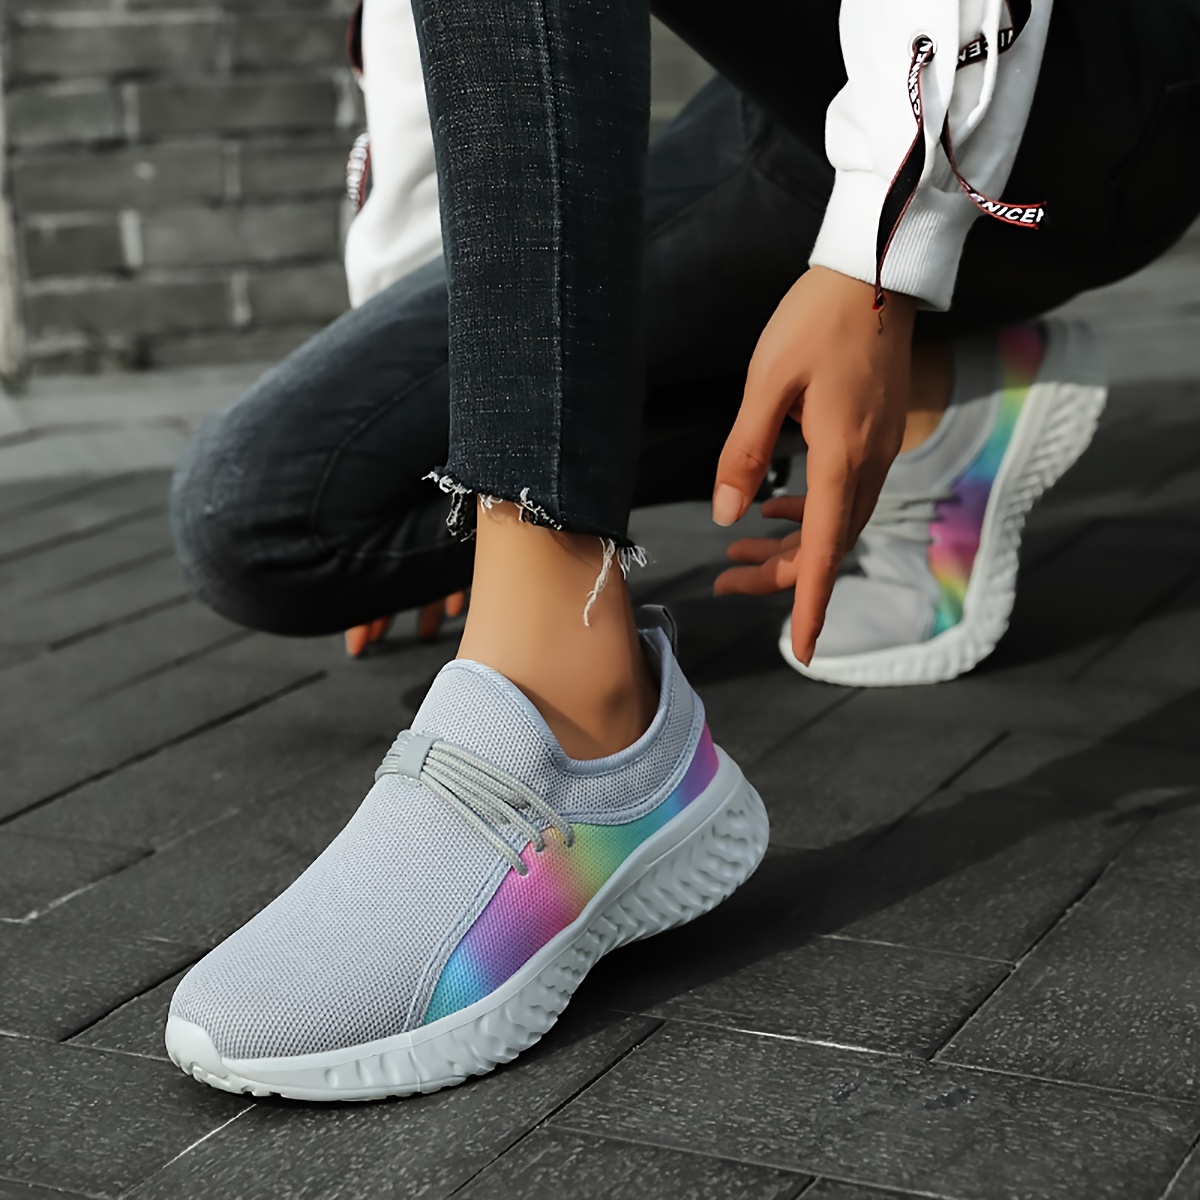 Women Outdoor Mesh Solid Color Sports Shoes Runing Breathable Shoes  Sneakers Slip on Sneakers Women Size 7 Shoe Laces for Womens Sneakers Mauve  Women